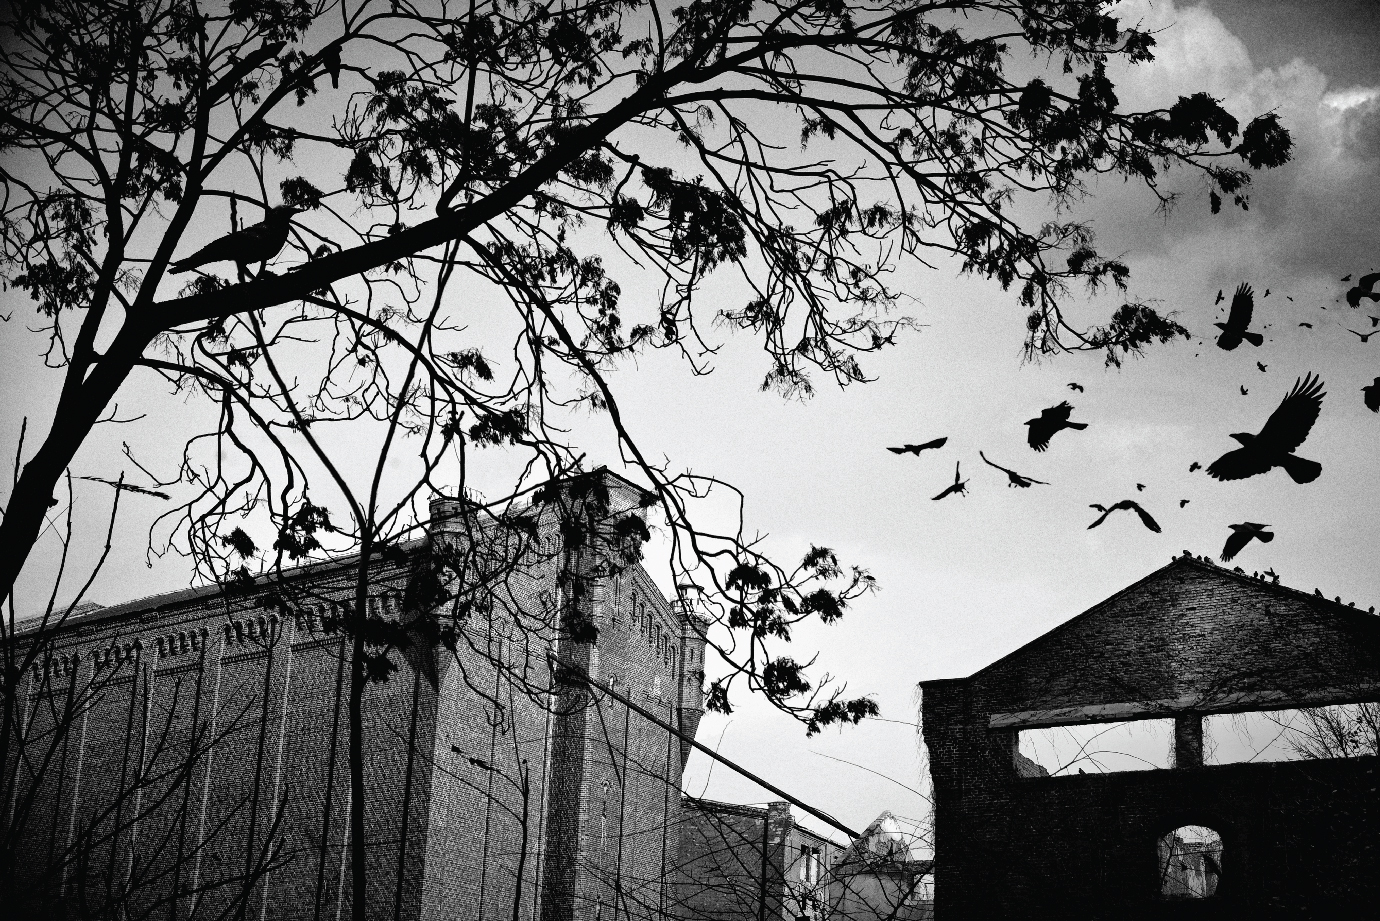 Birds flying against a darkened sky with the branches of a tree in the foreground and a couple of buildings in the background